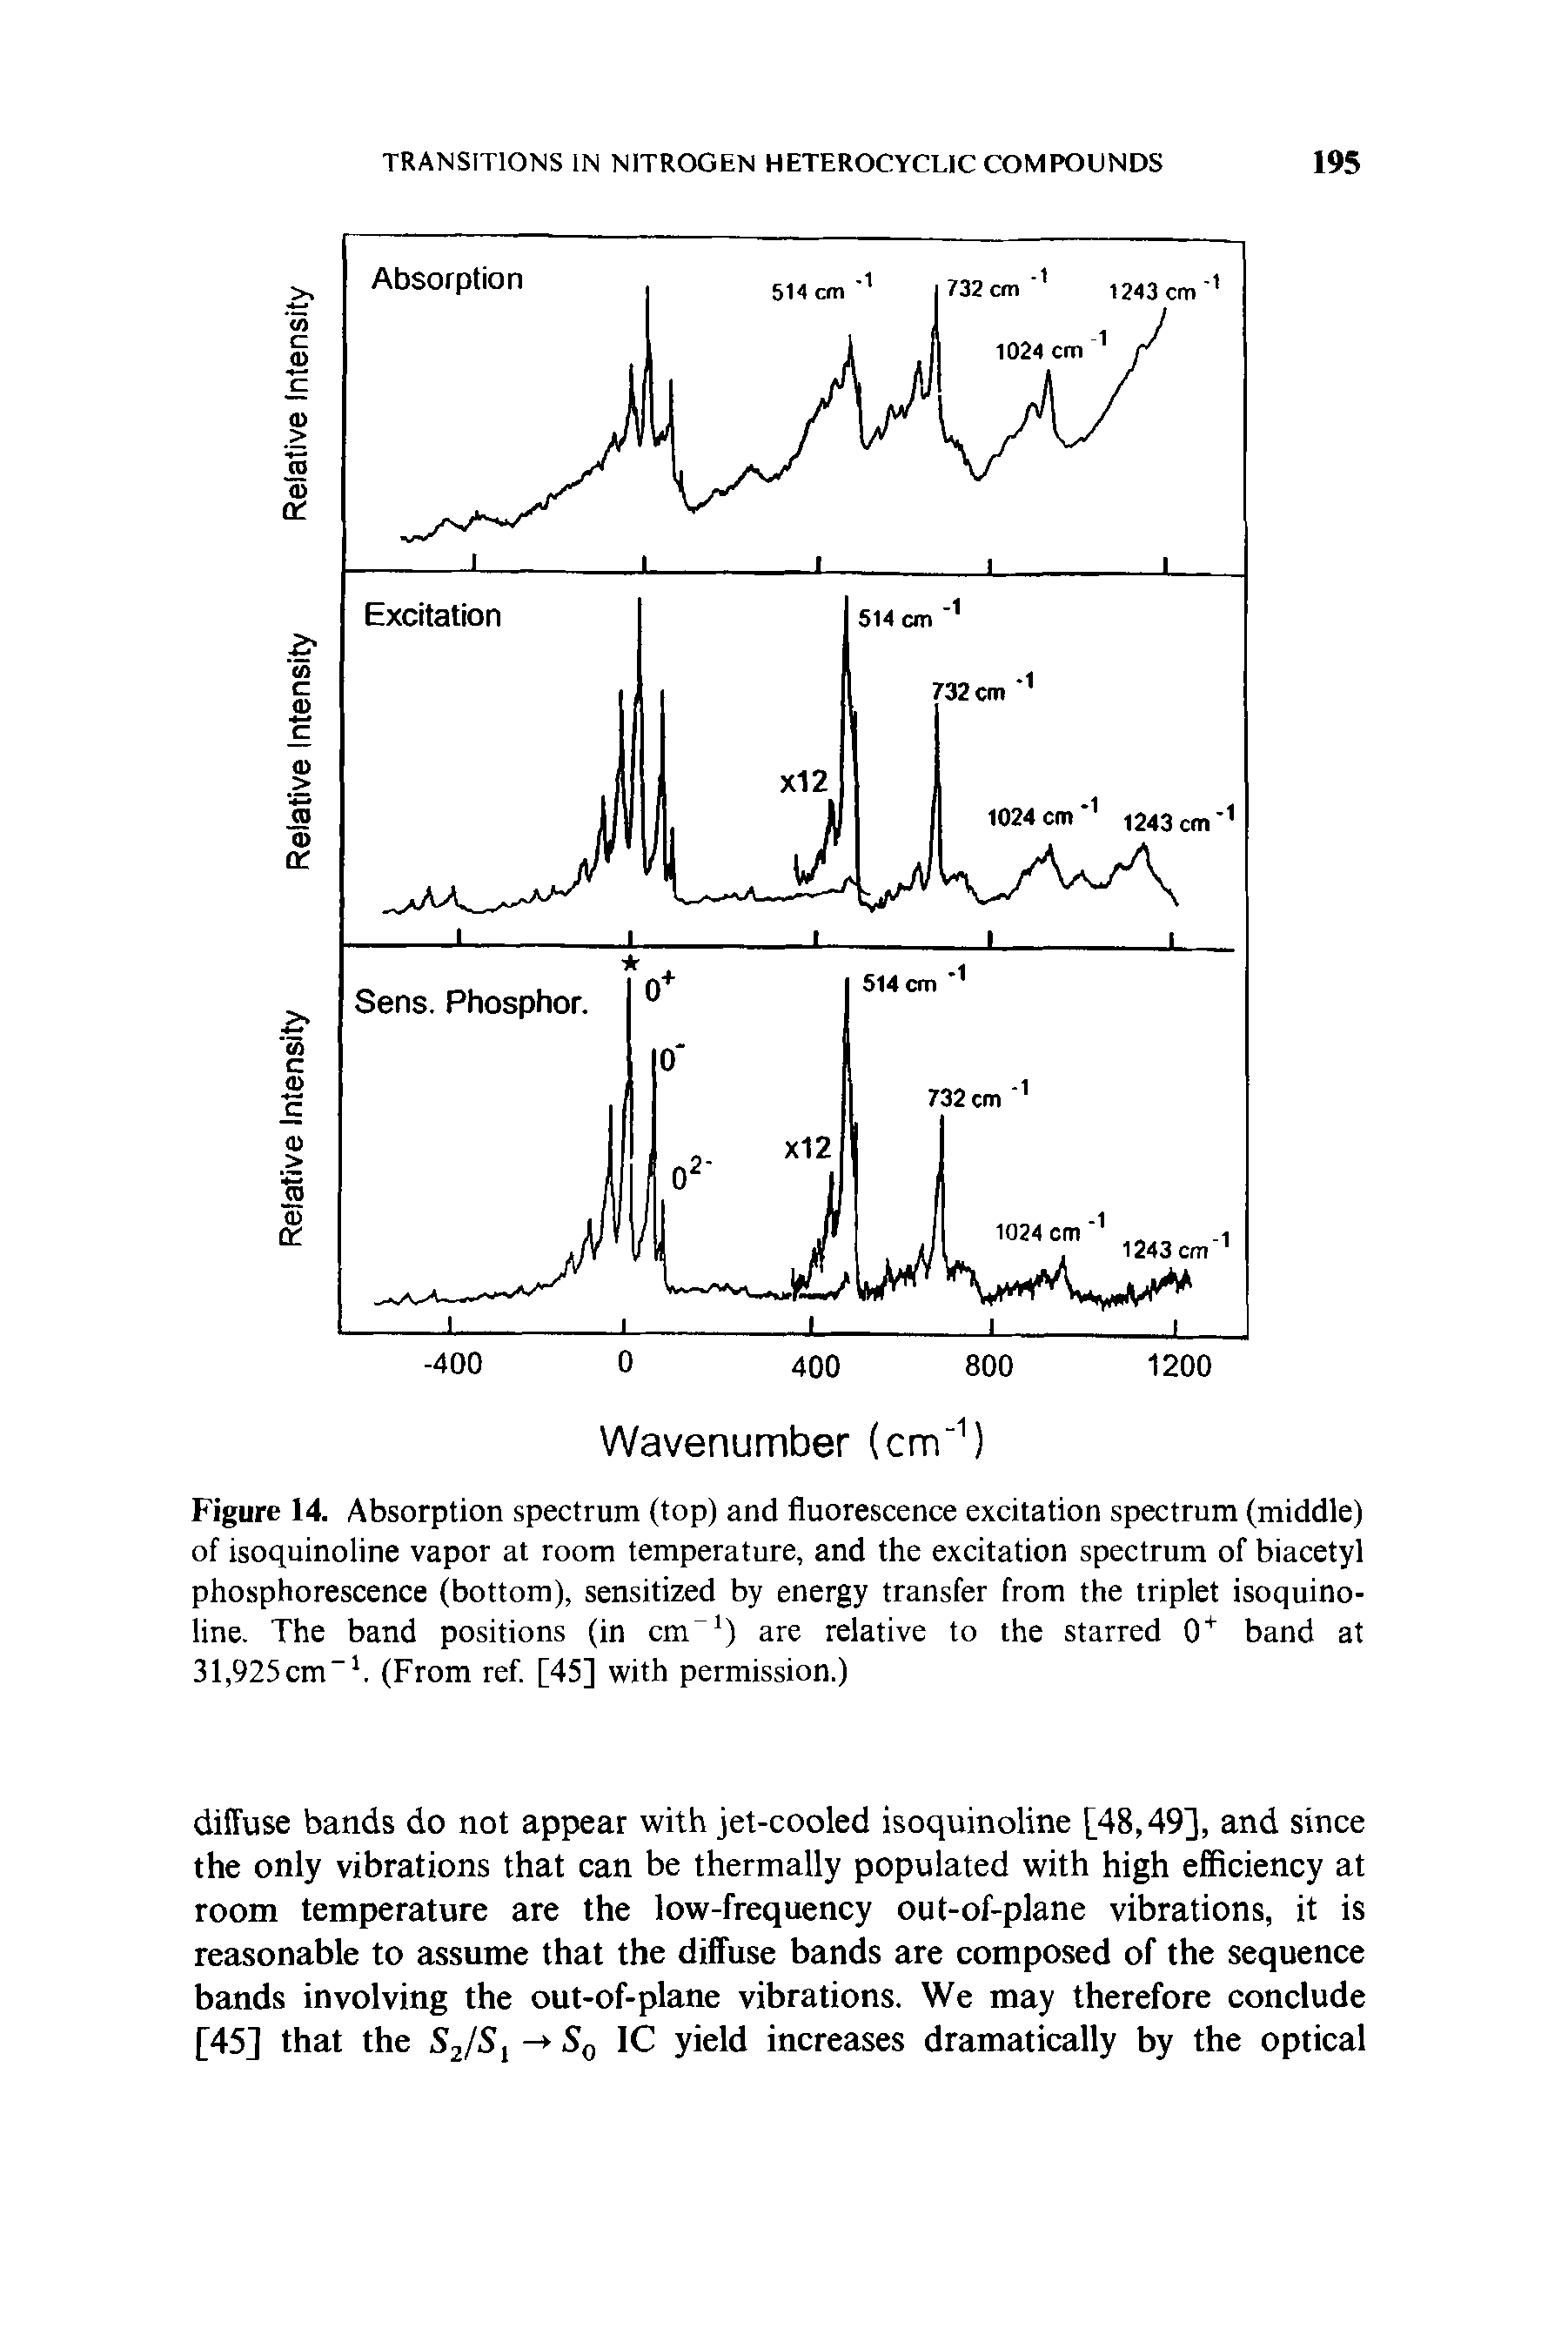 Figure 14. Absorption spectrum (top) and fluorescence excitation spectrum (middle) of isoquinoline vapor at room temperature, and the excitation spectrum of biacetyl phosphorescence (bottom), sensitized by energy transfer from the triplet isoquinoline. The band positions (in cmT1) are relative to the starred 0+ band at 31,925cm-1. (From ref. [45] with permission.)...